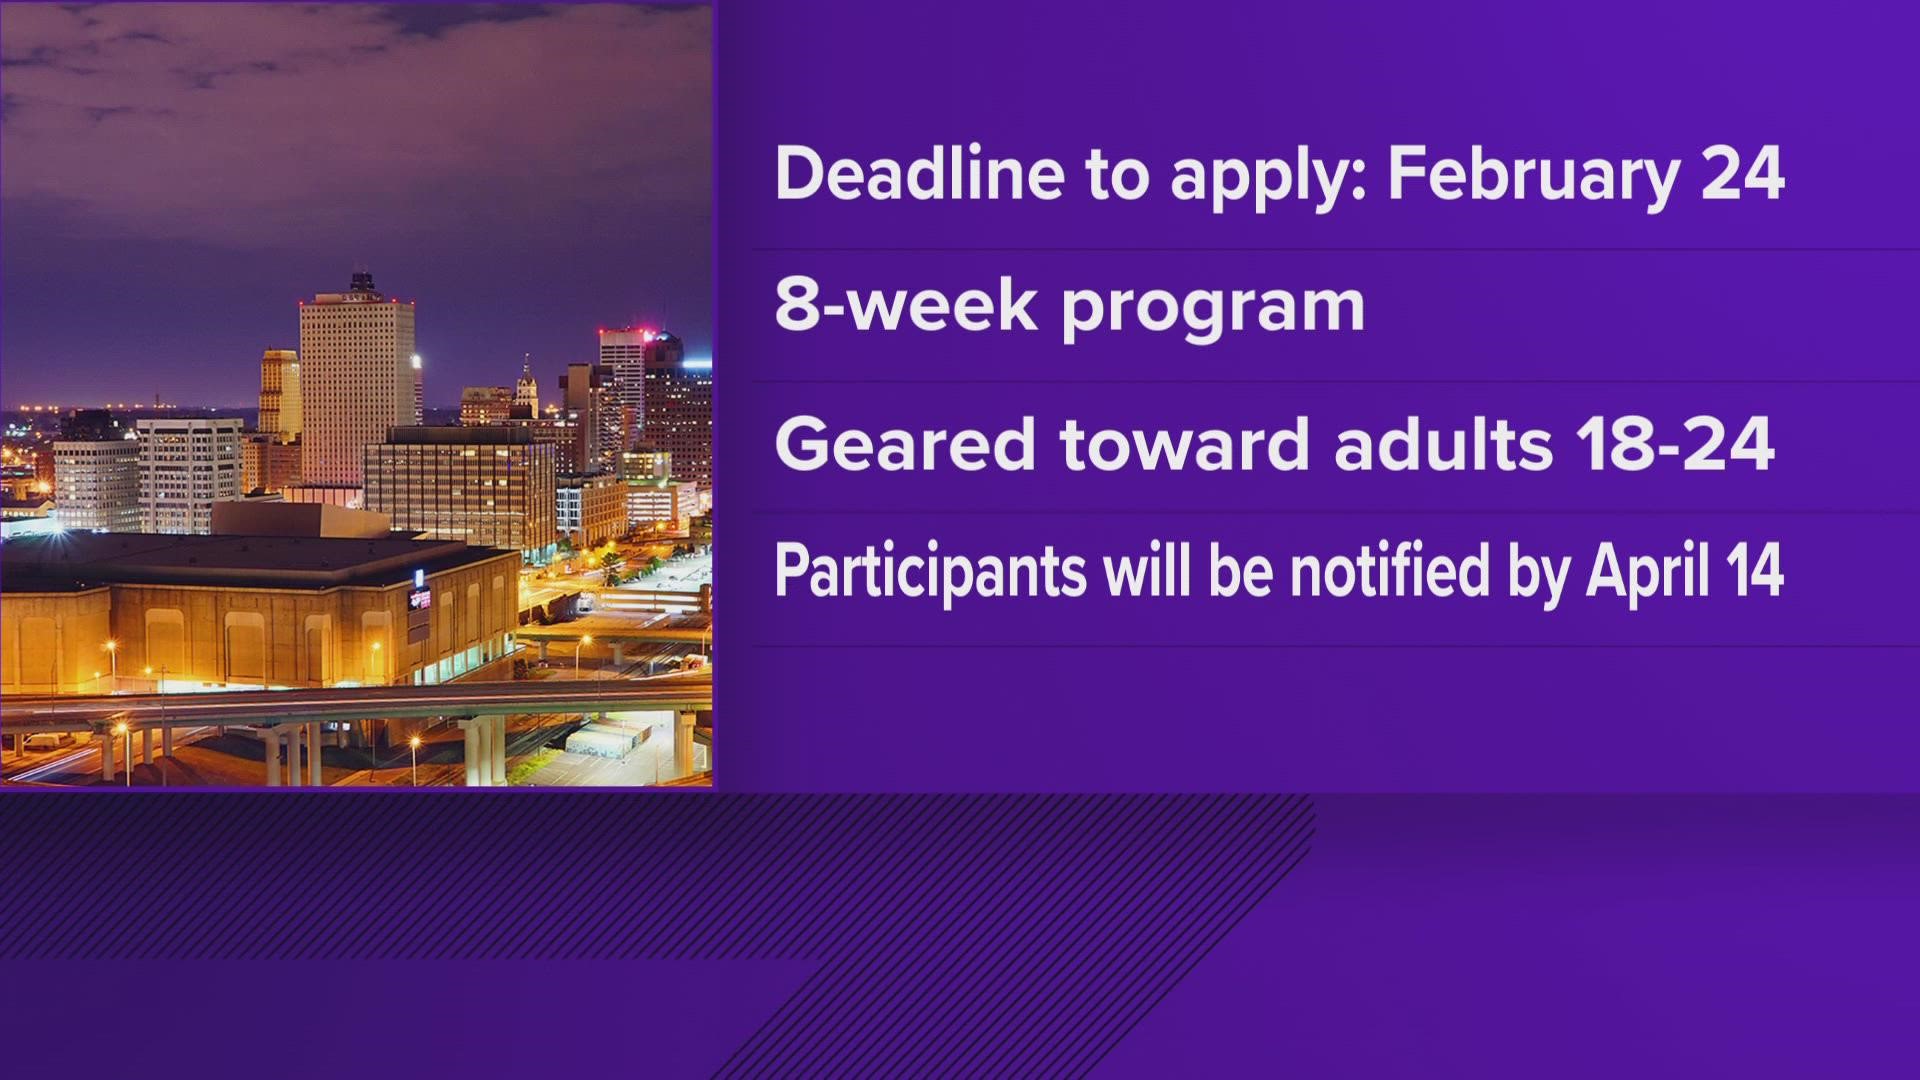 The deadline to apply is Tuesday, February 24, 2023. The program runs June 5 through July 28.